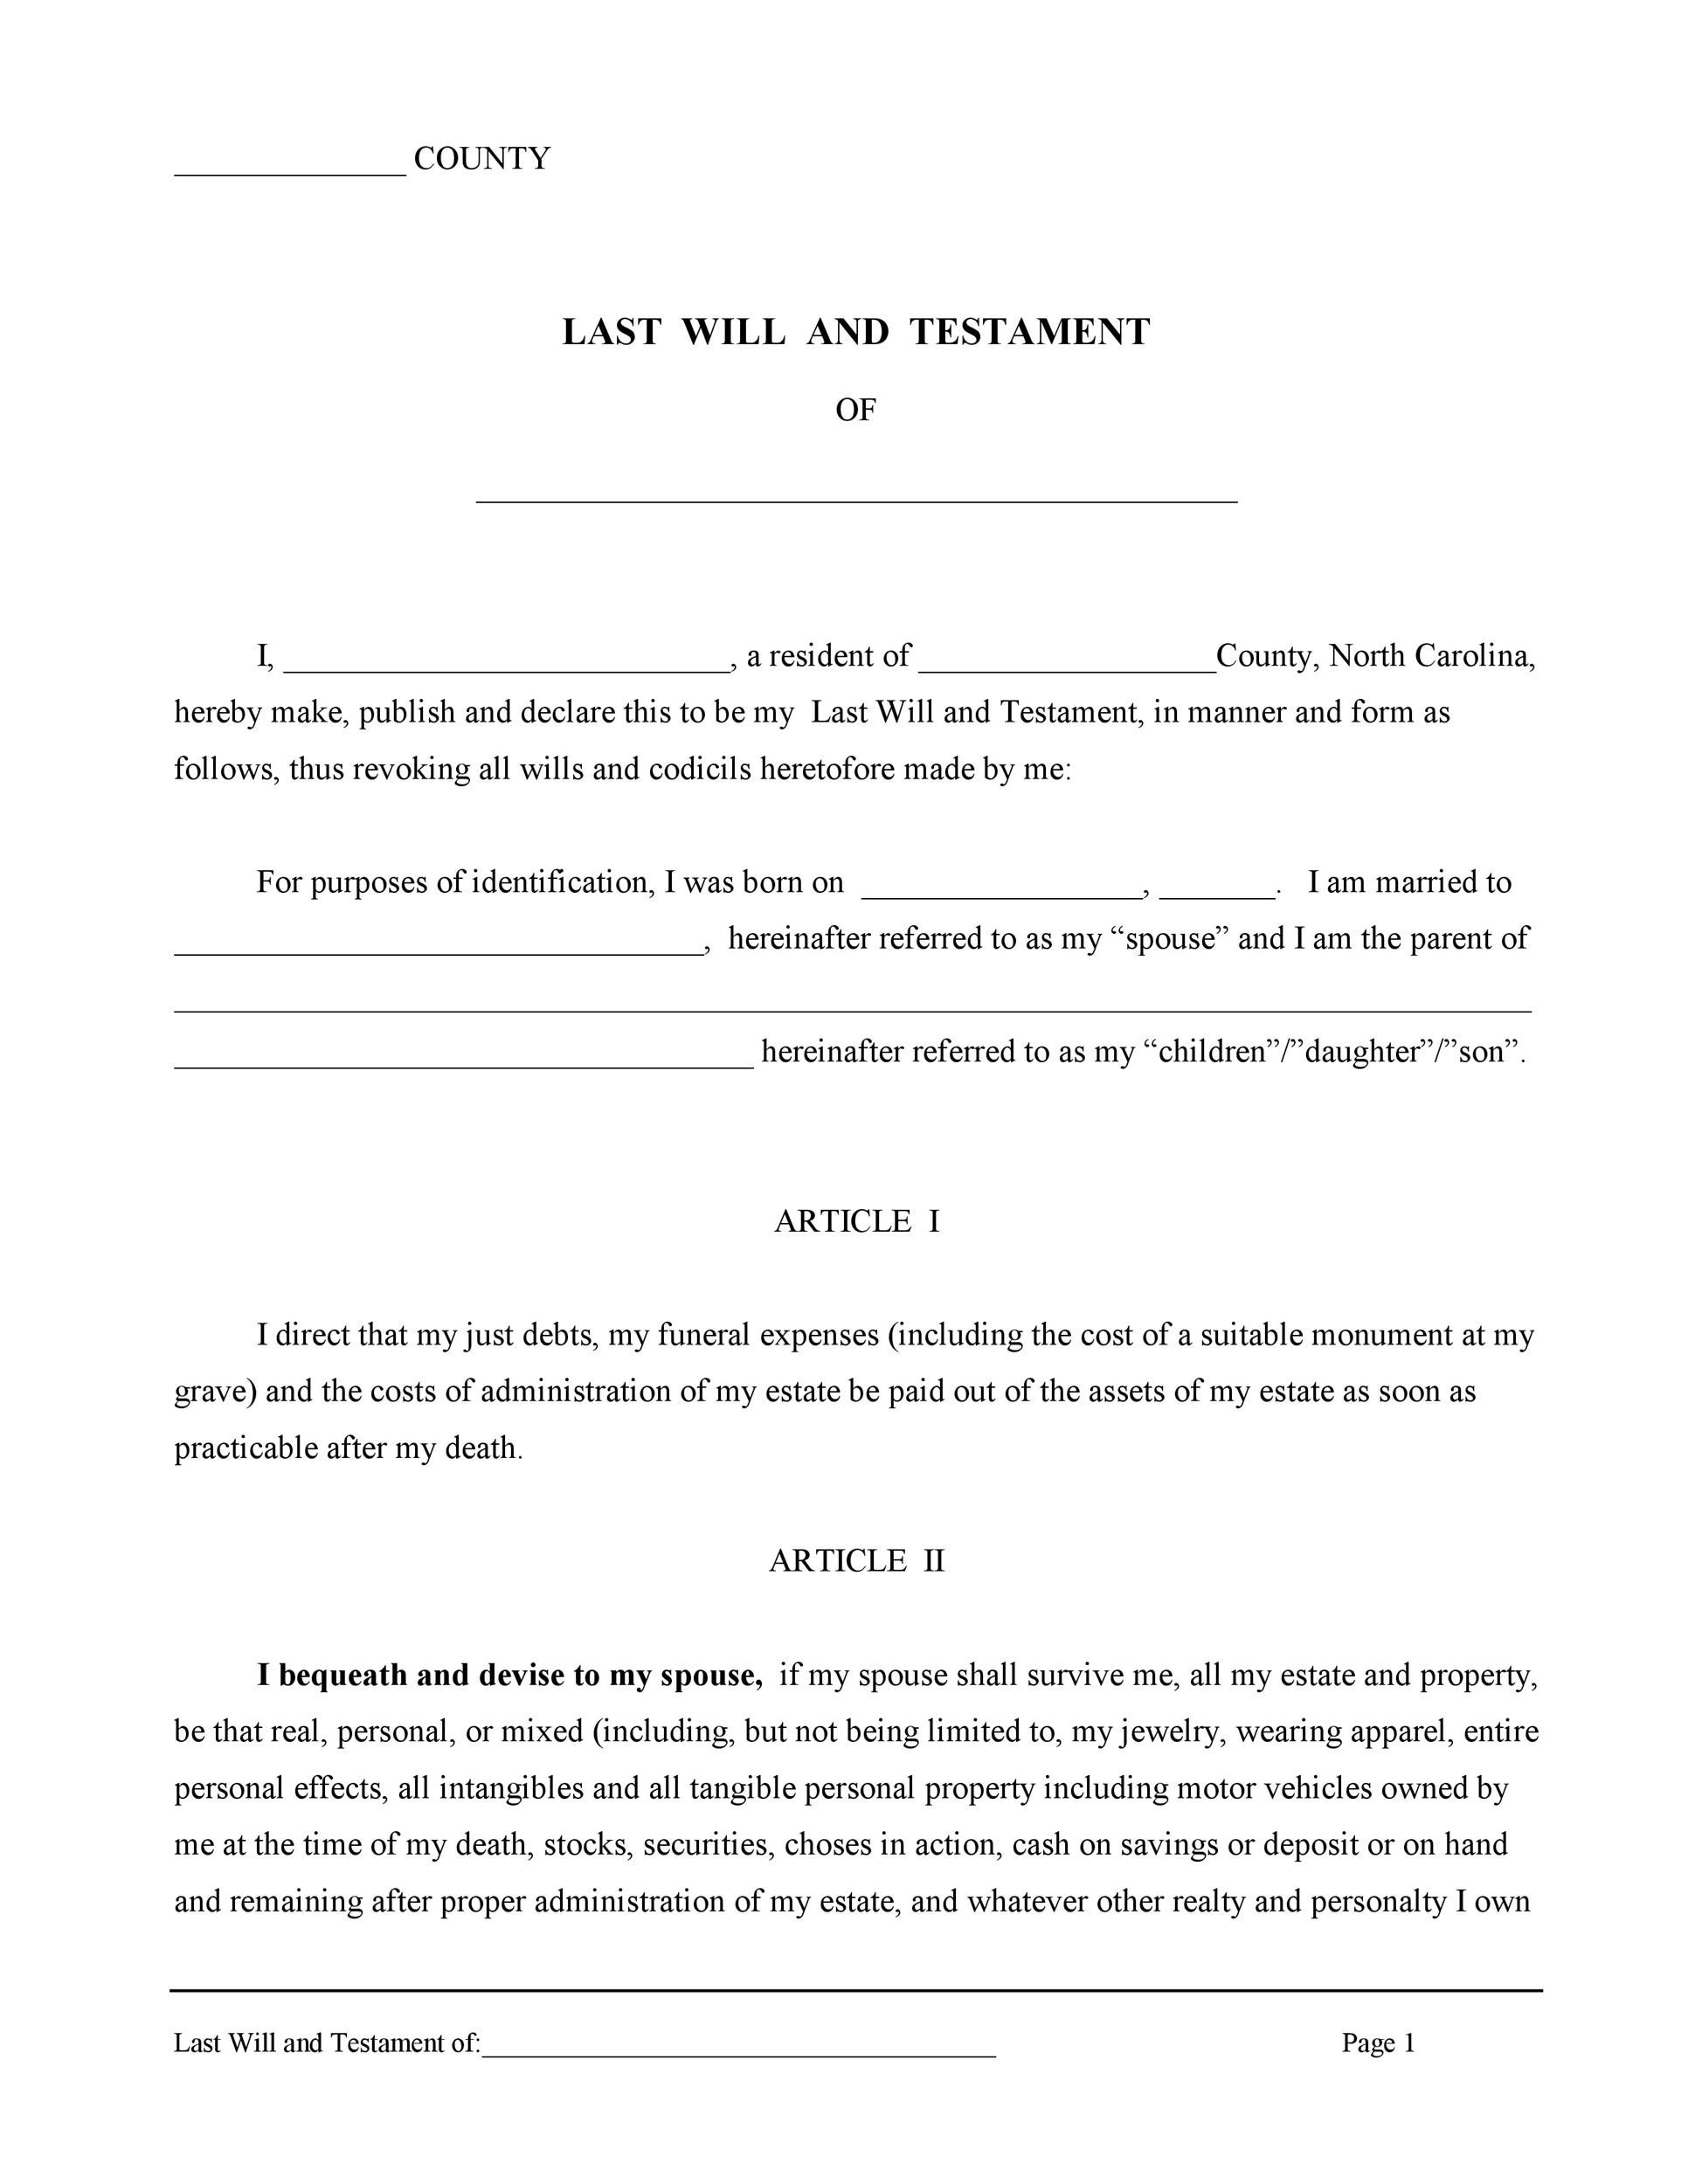 last will and testament template free download